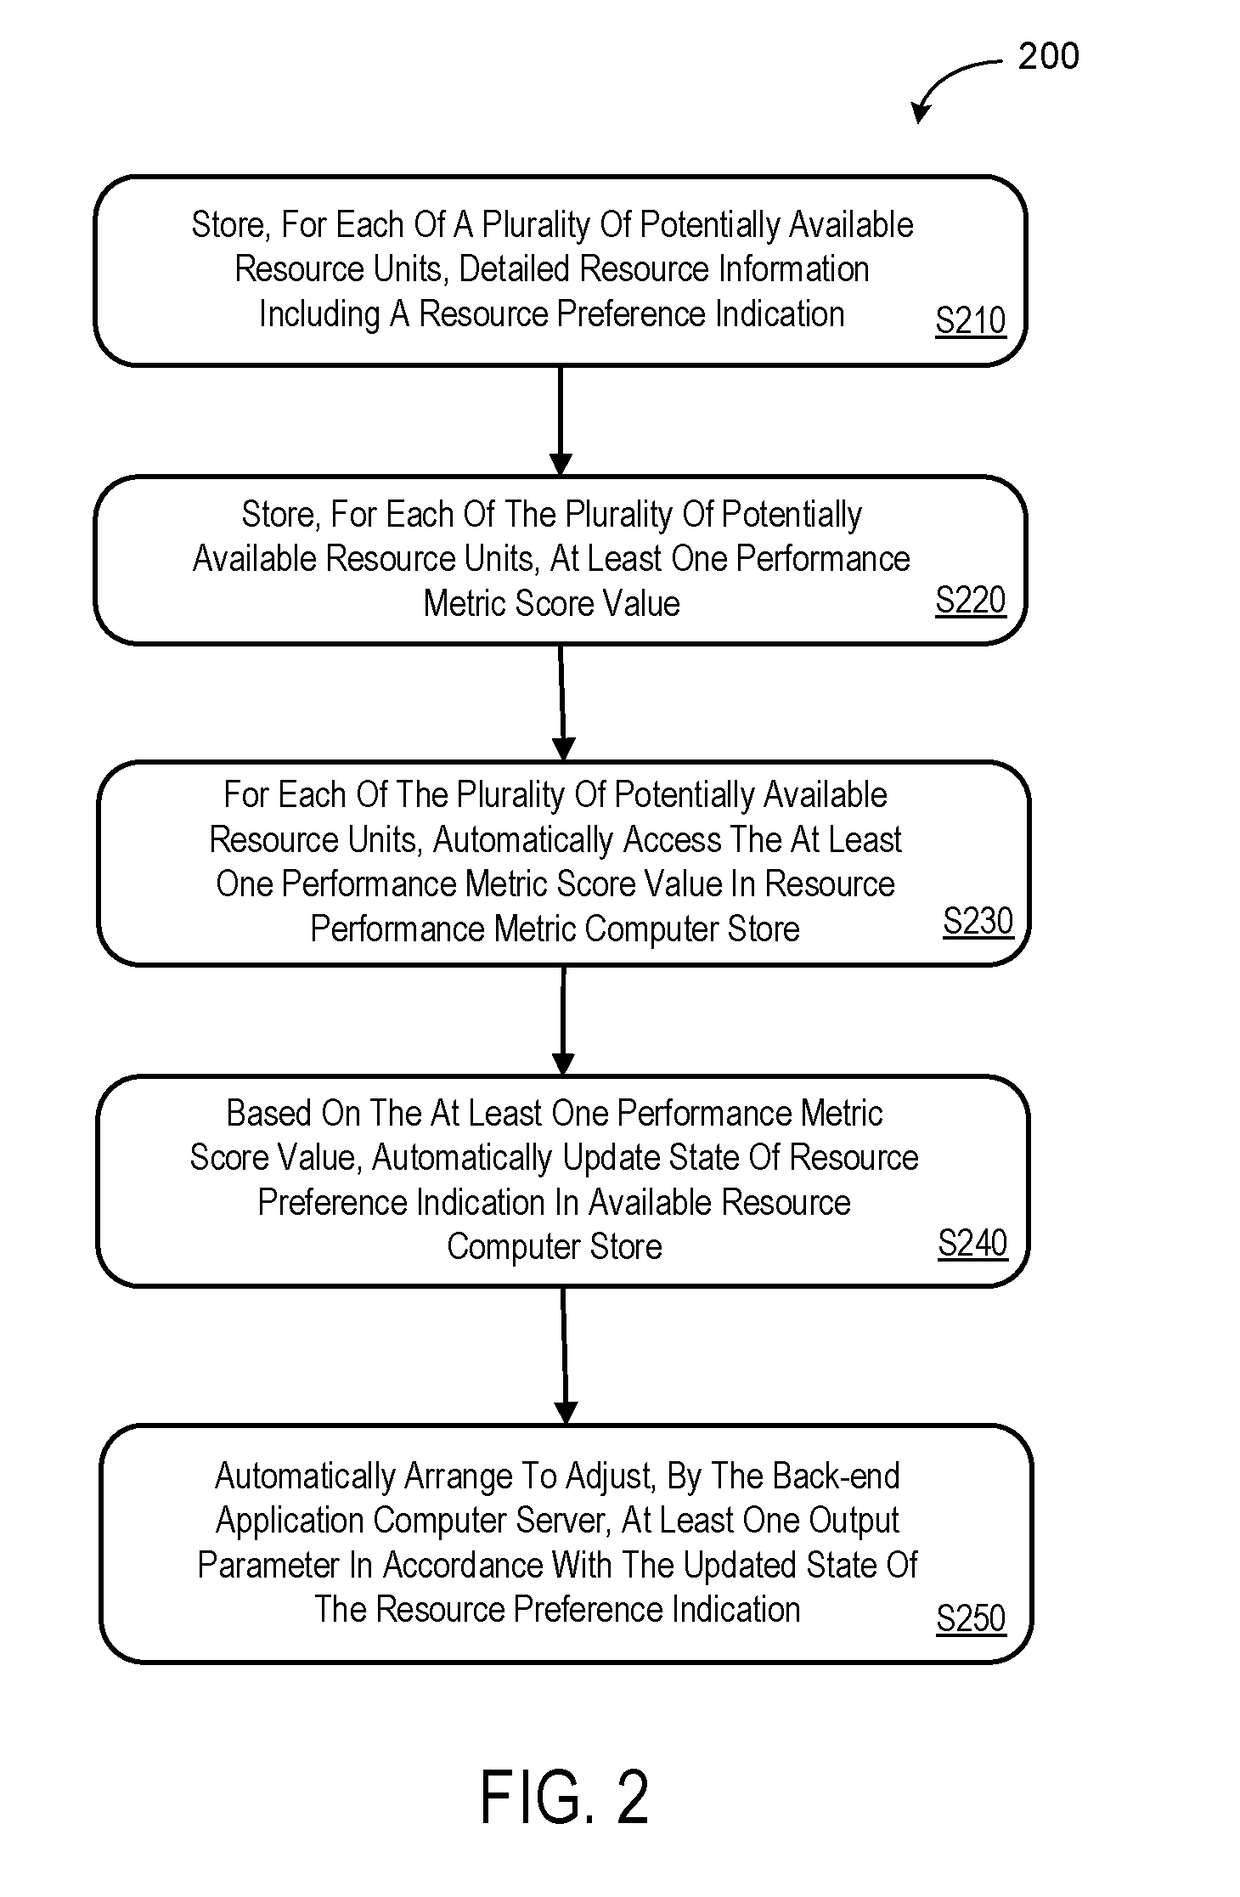 Output adjustment and monitoring in accordance with resource unit performance